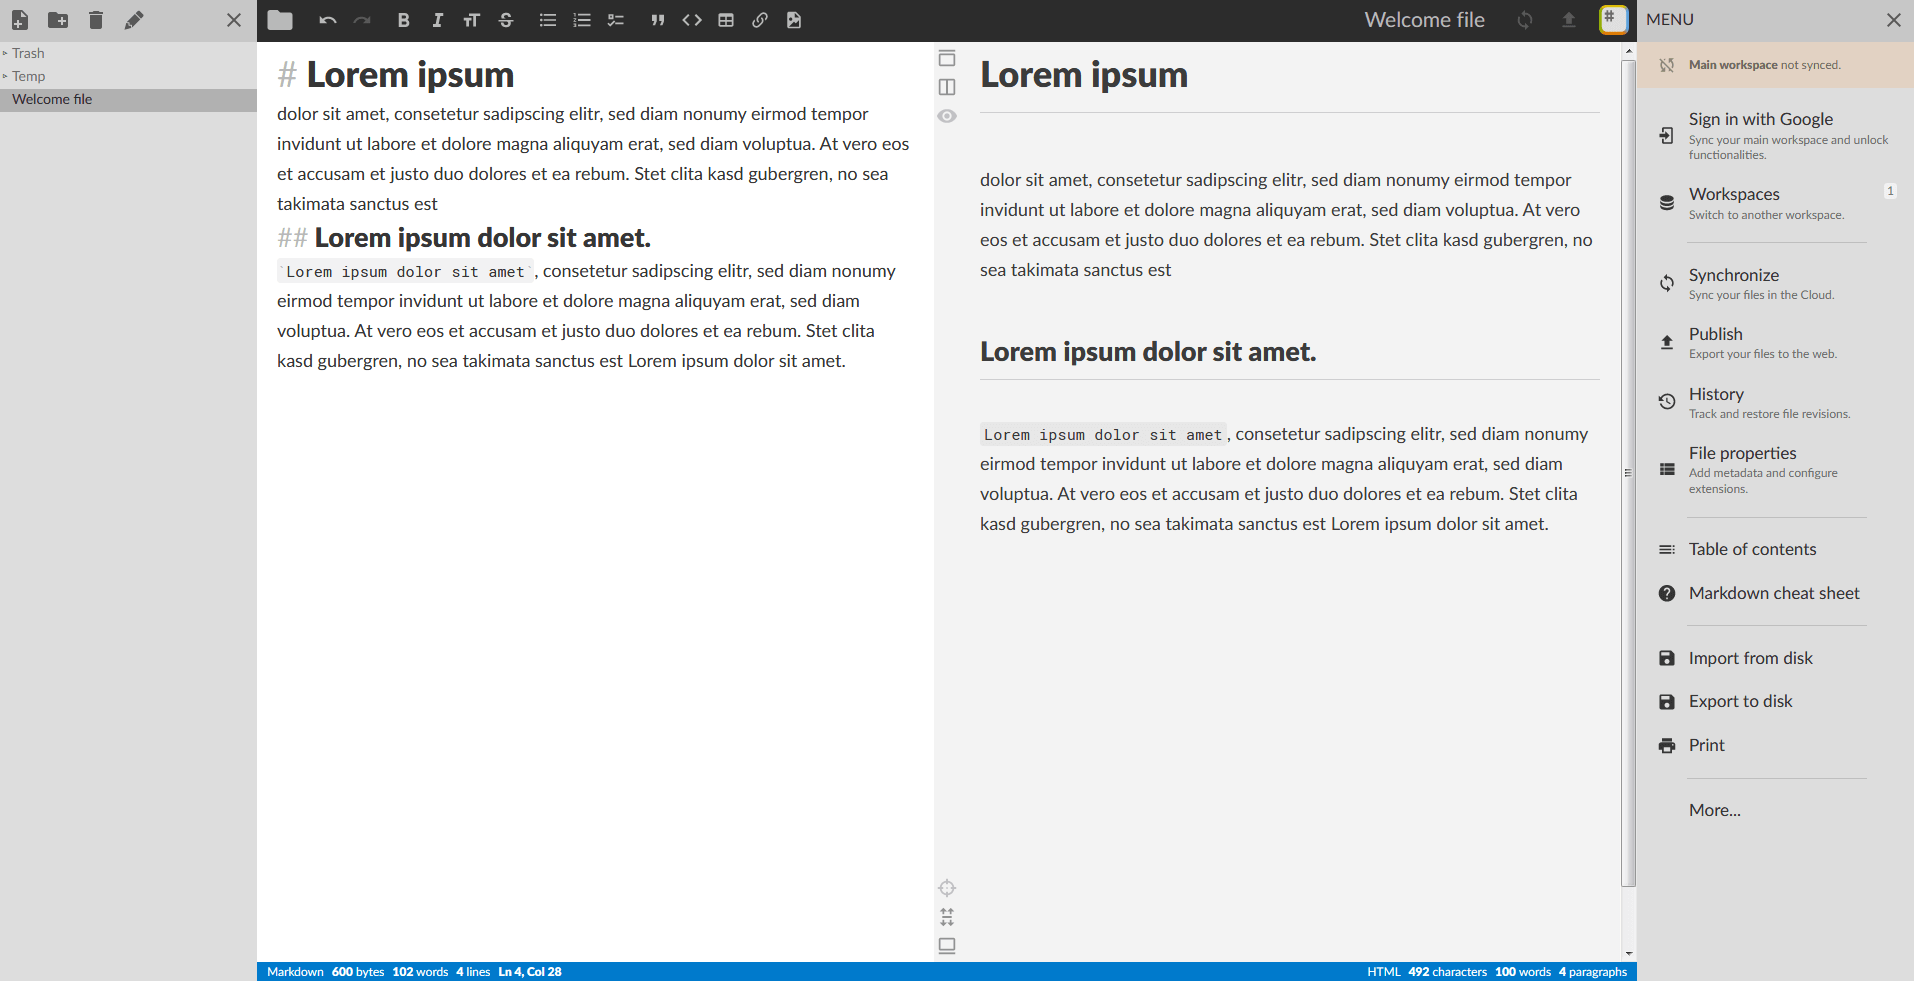 The online Markdown editor, StackEdit